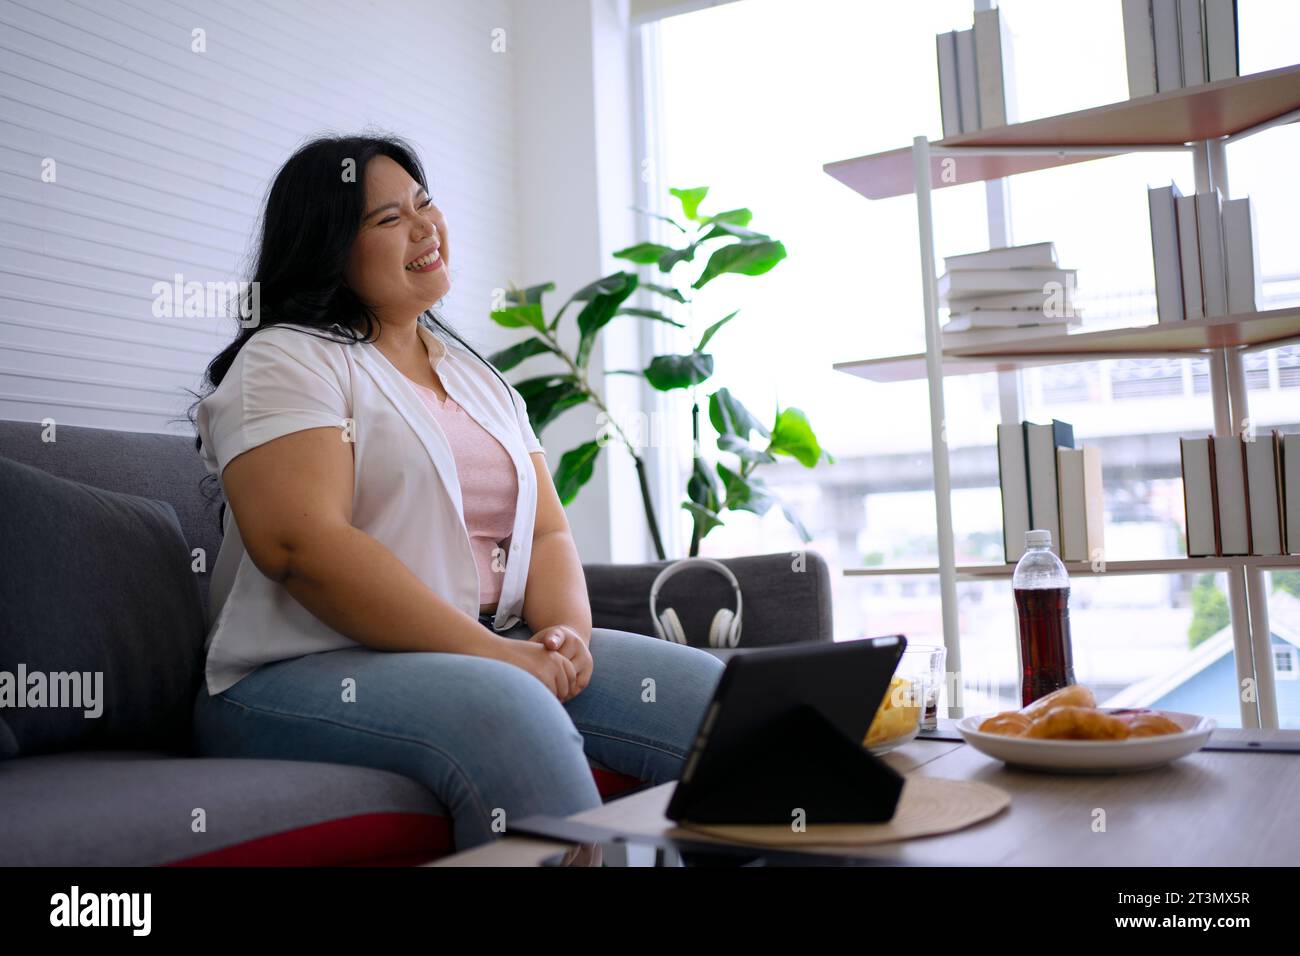 Plus size woman is eating donut. Health care and lifestyle concept. Stock Photo